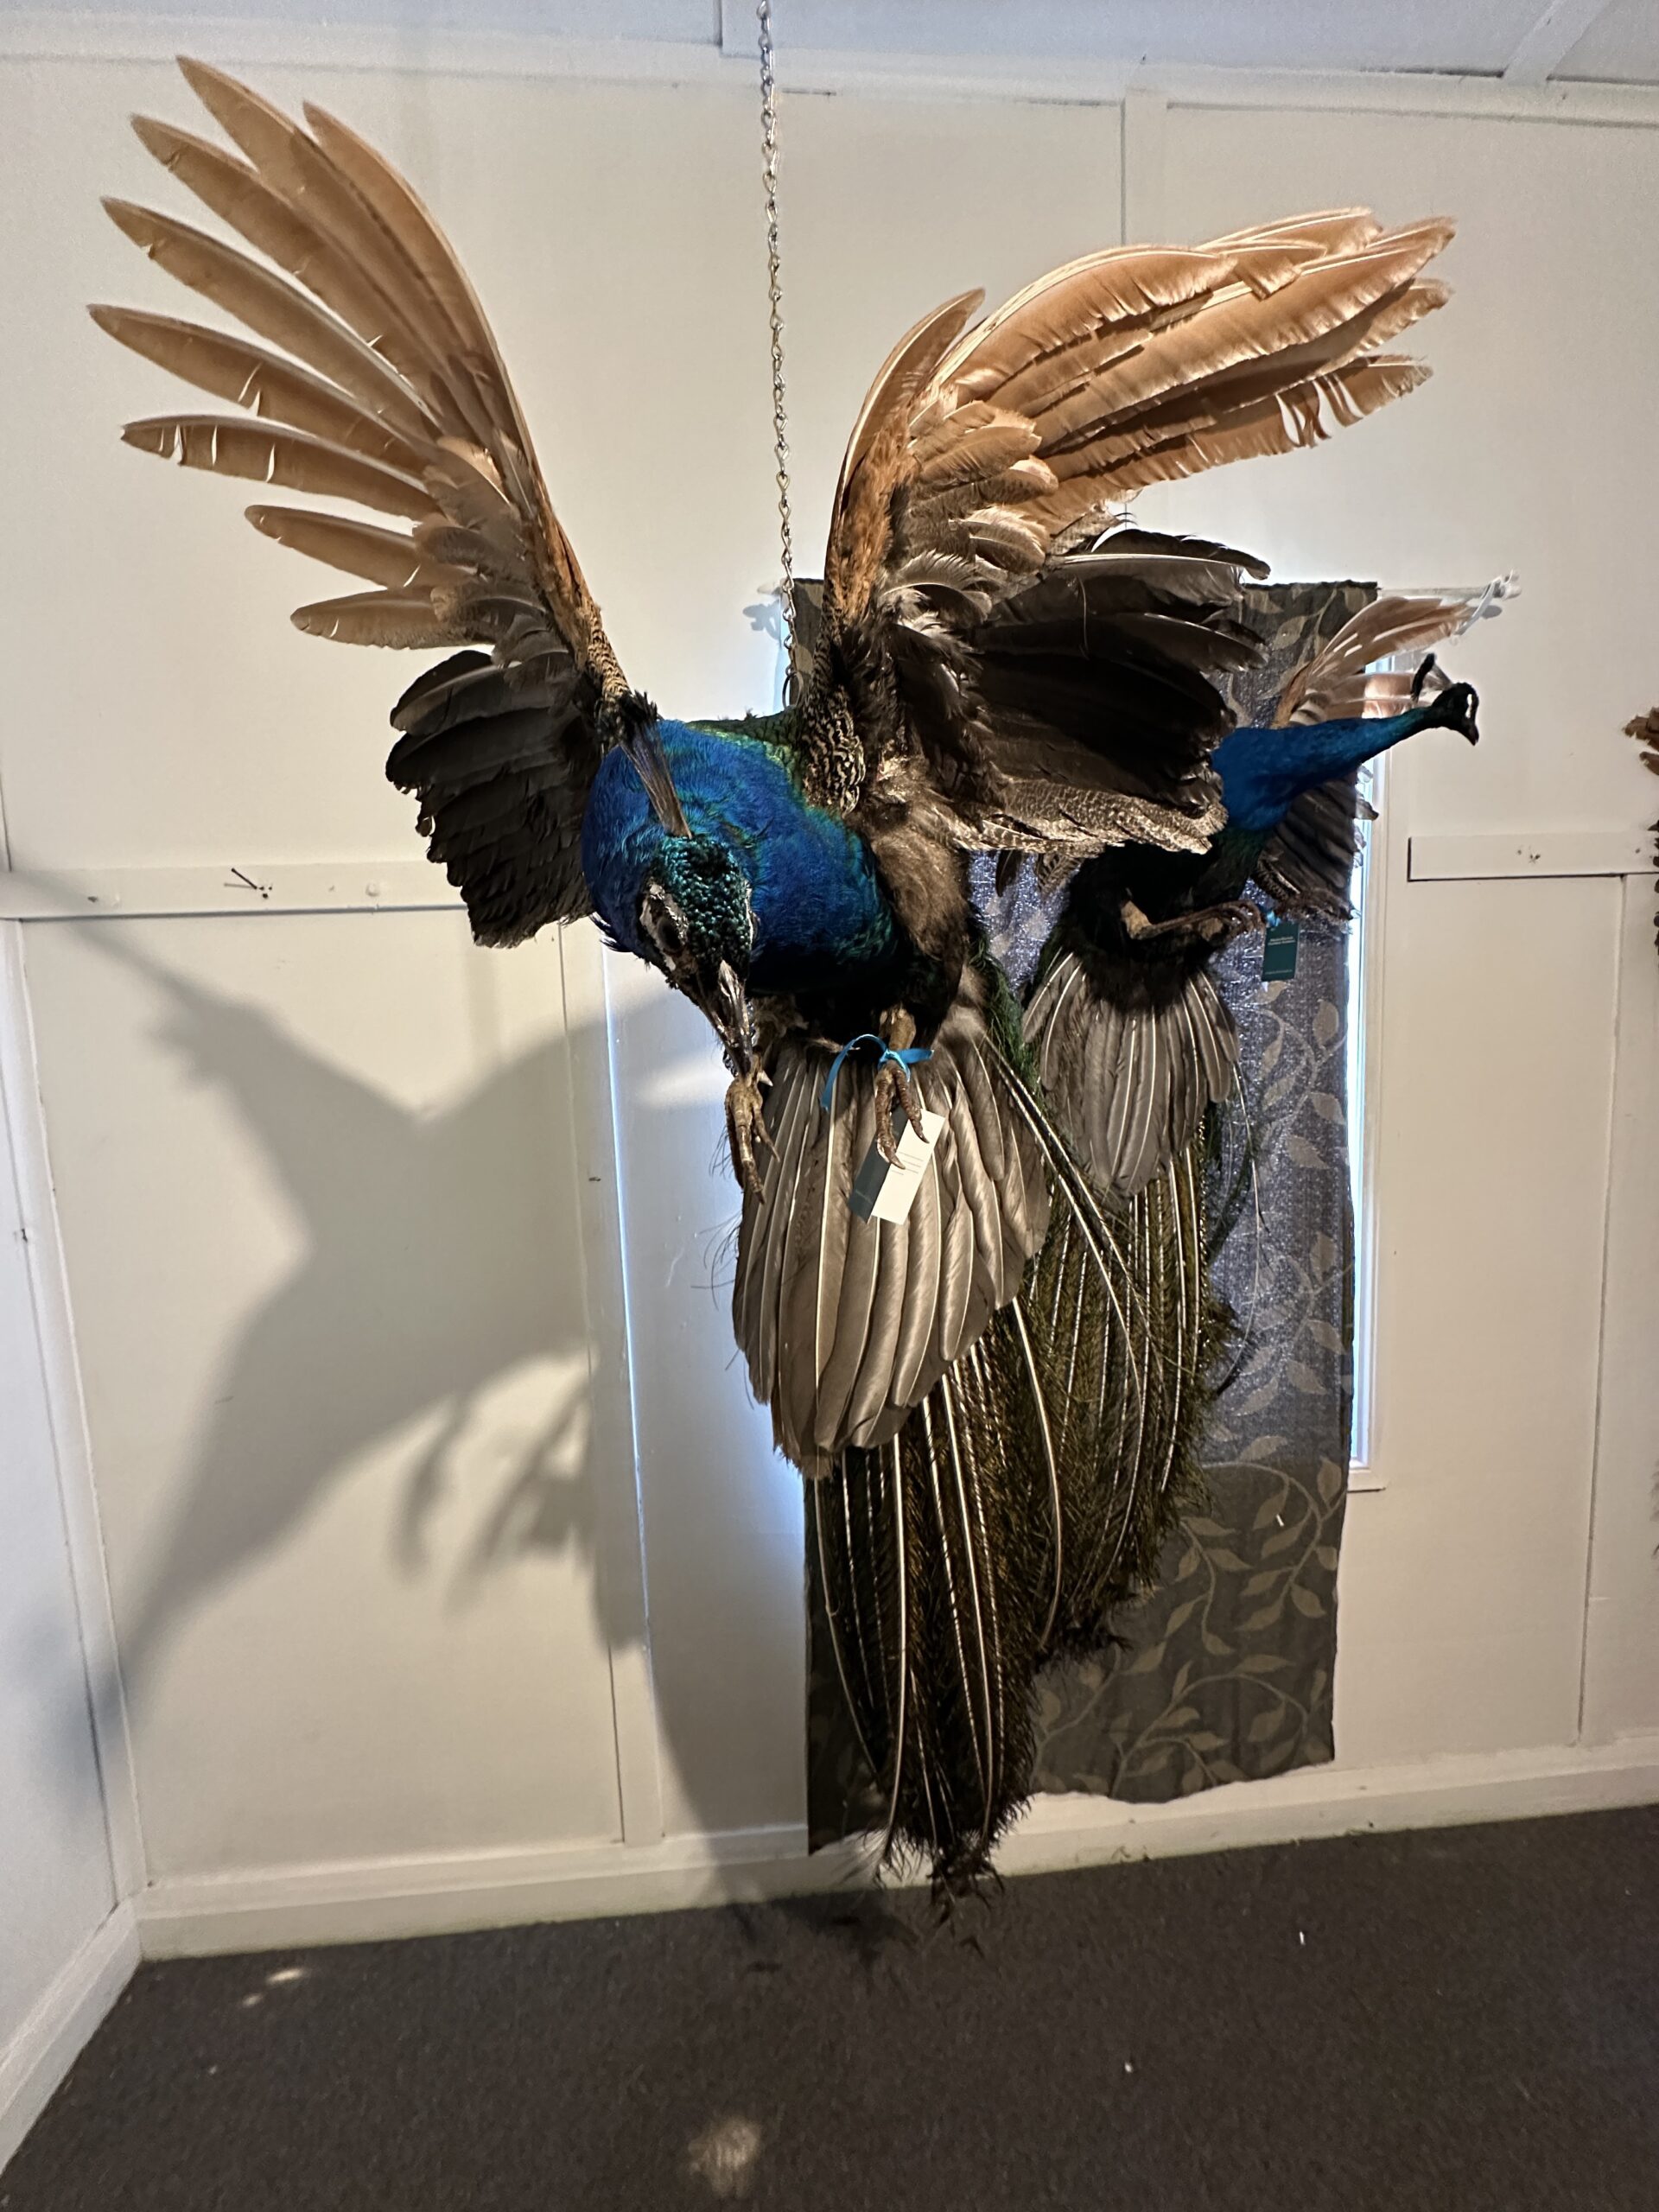 fighting peacock displayed showing front of peacock